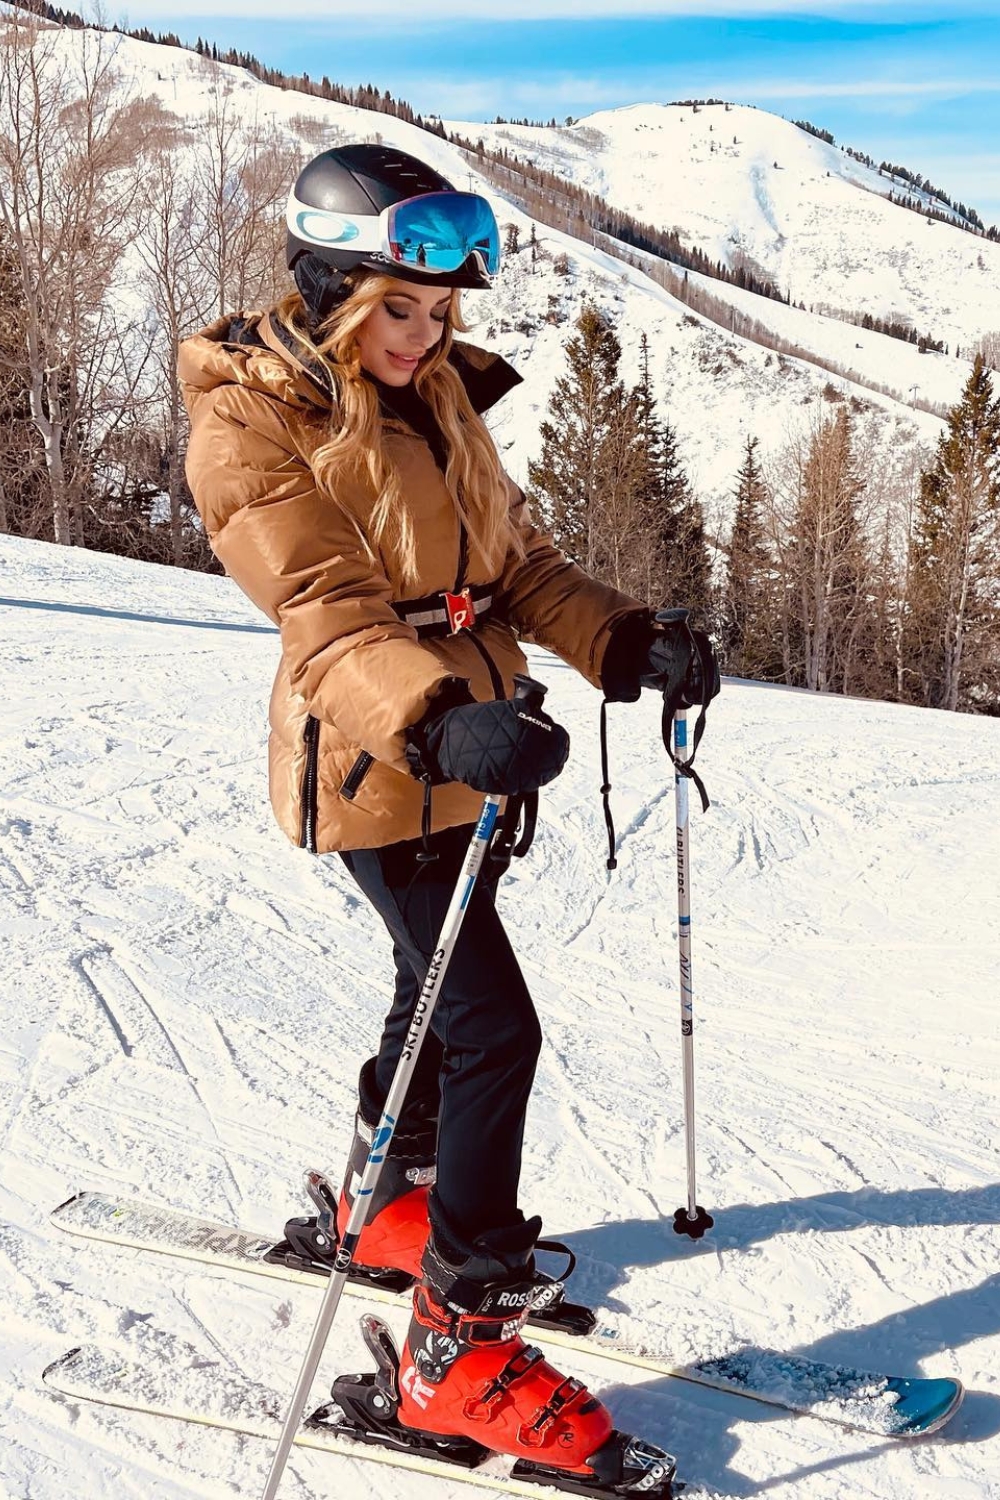 Ski Outfit Ideas - Black Pants and Brown Puffer Jacket